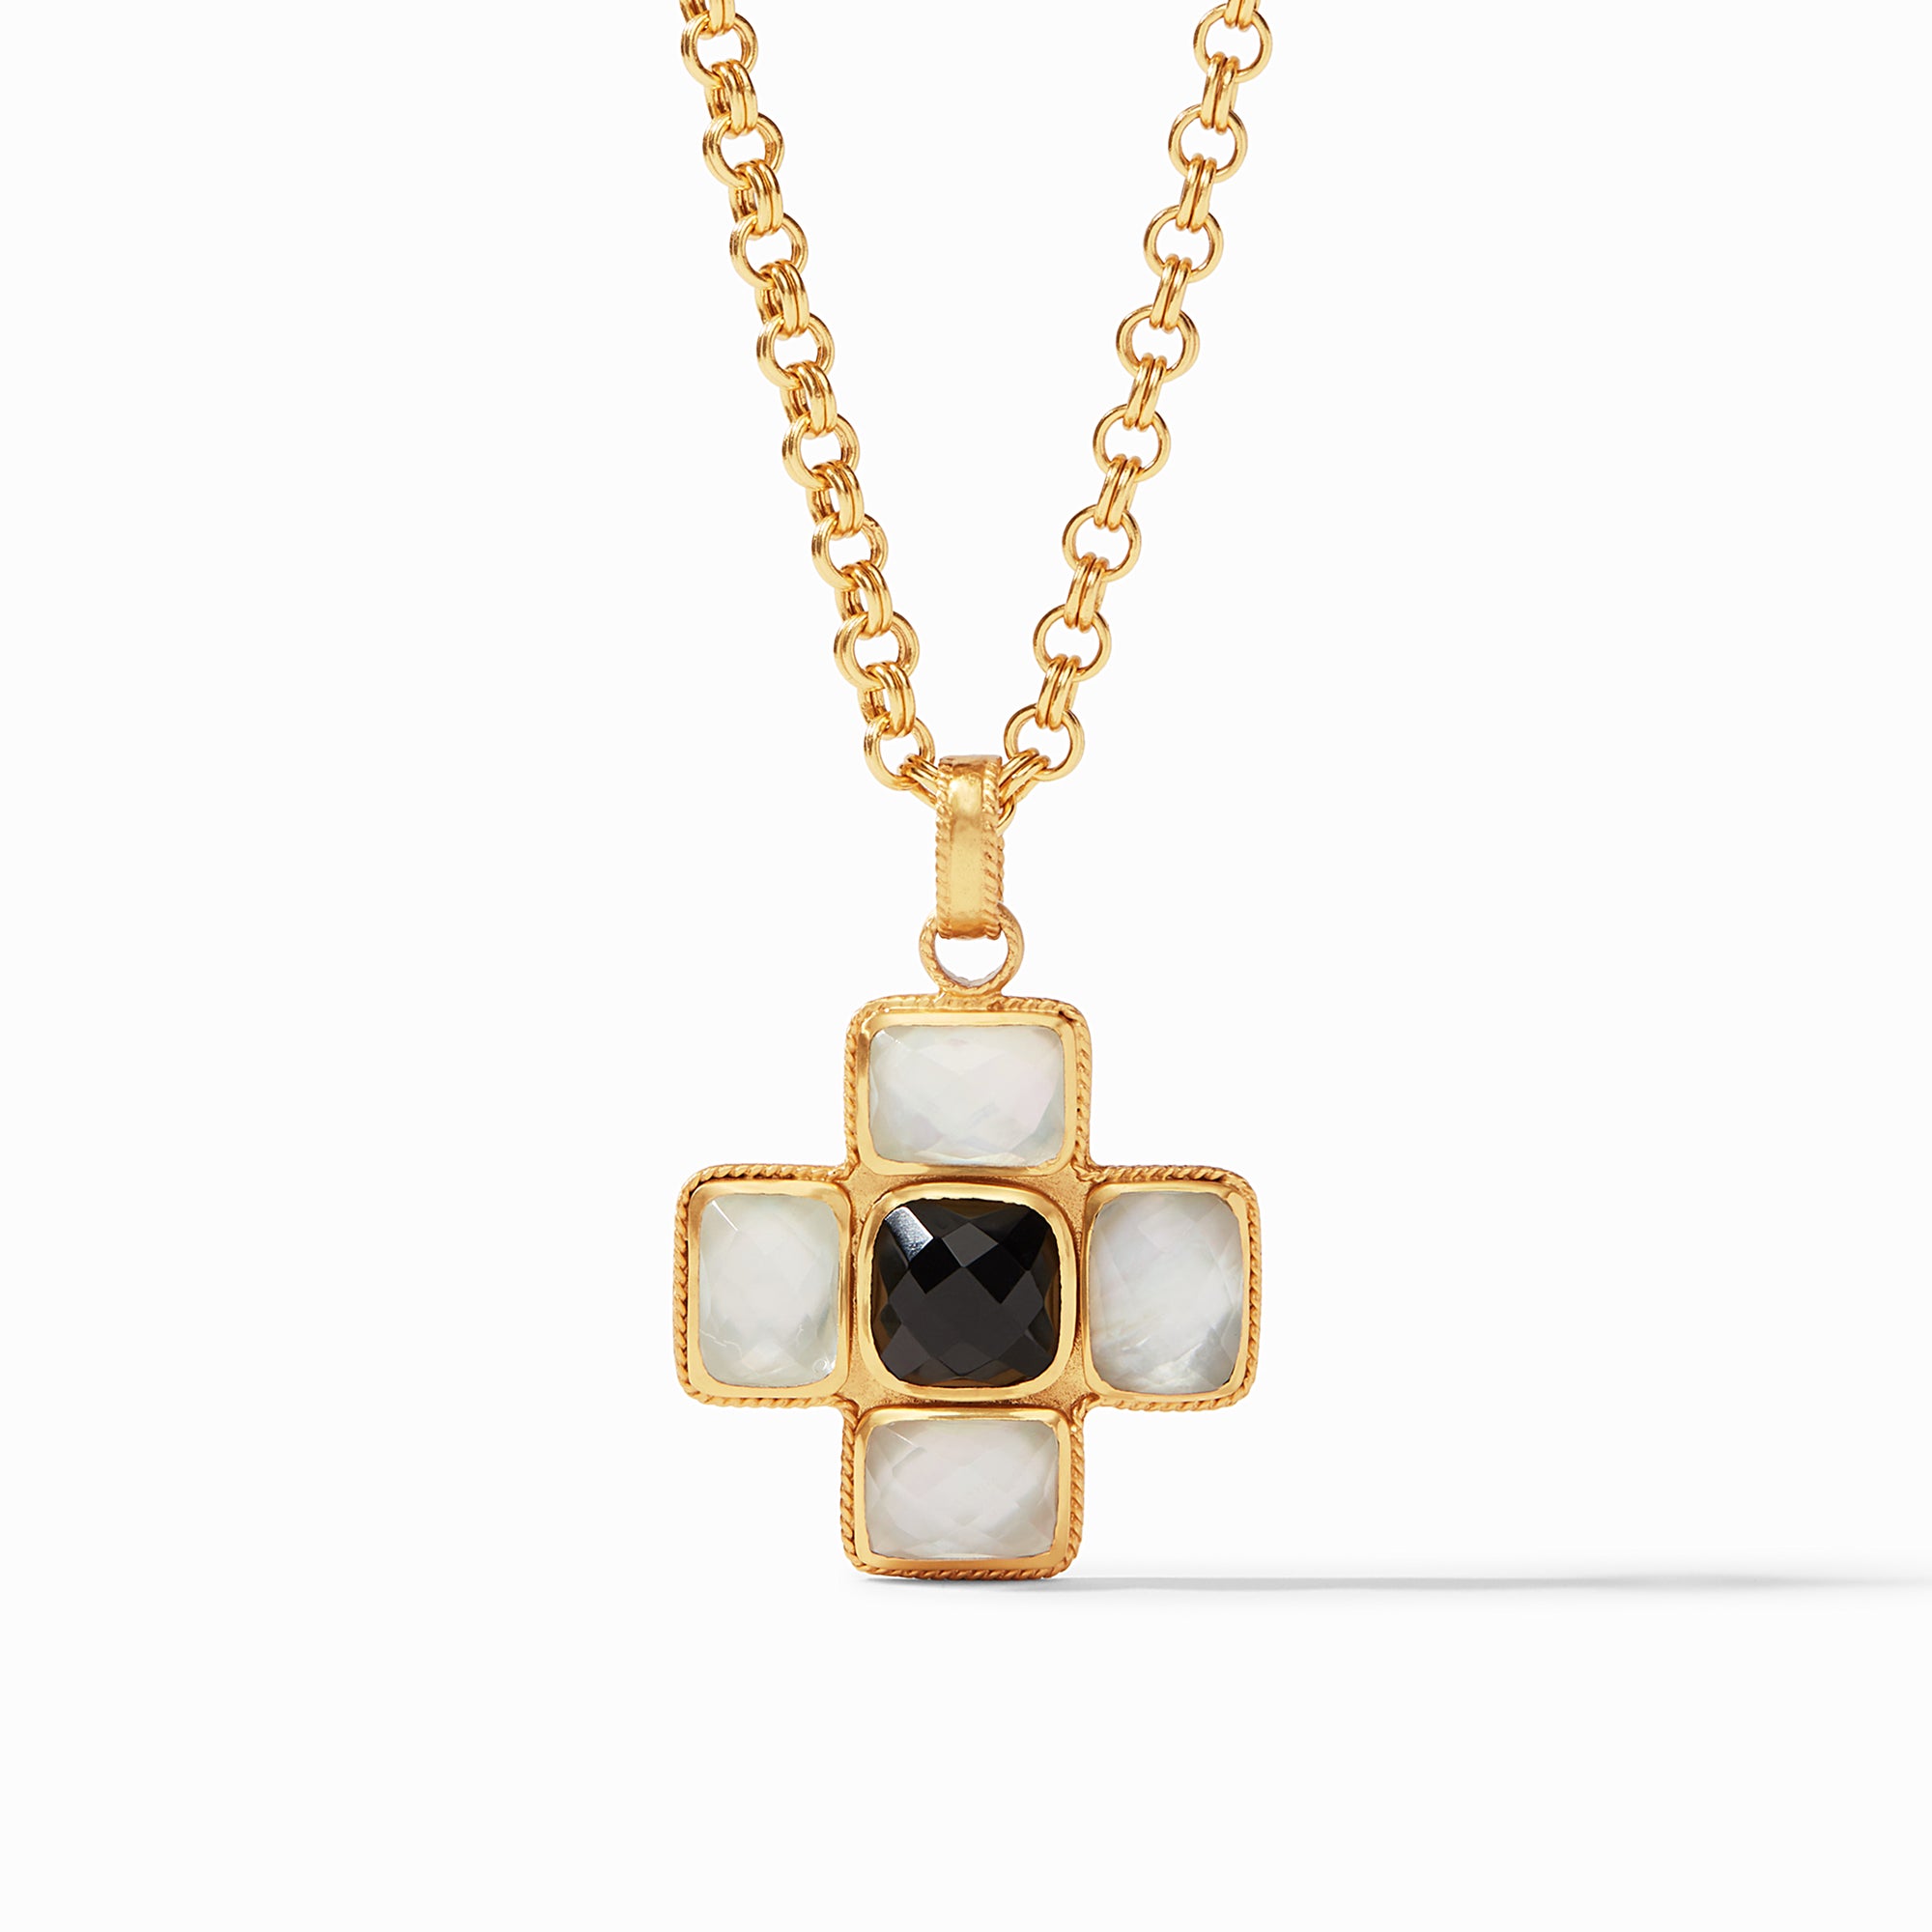 Julie Vos - Savoy Pendant, Iridescent Clear Crystal and Obsidian Black